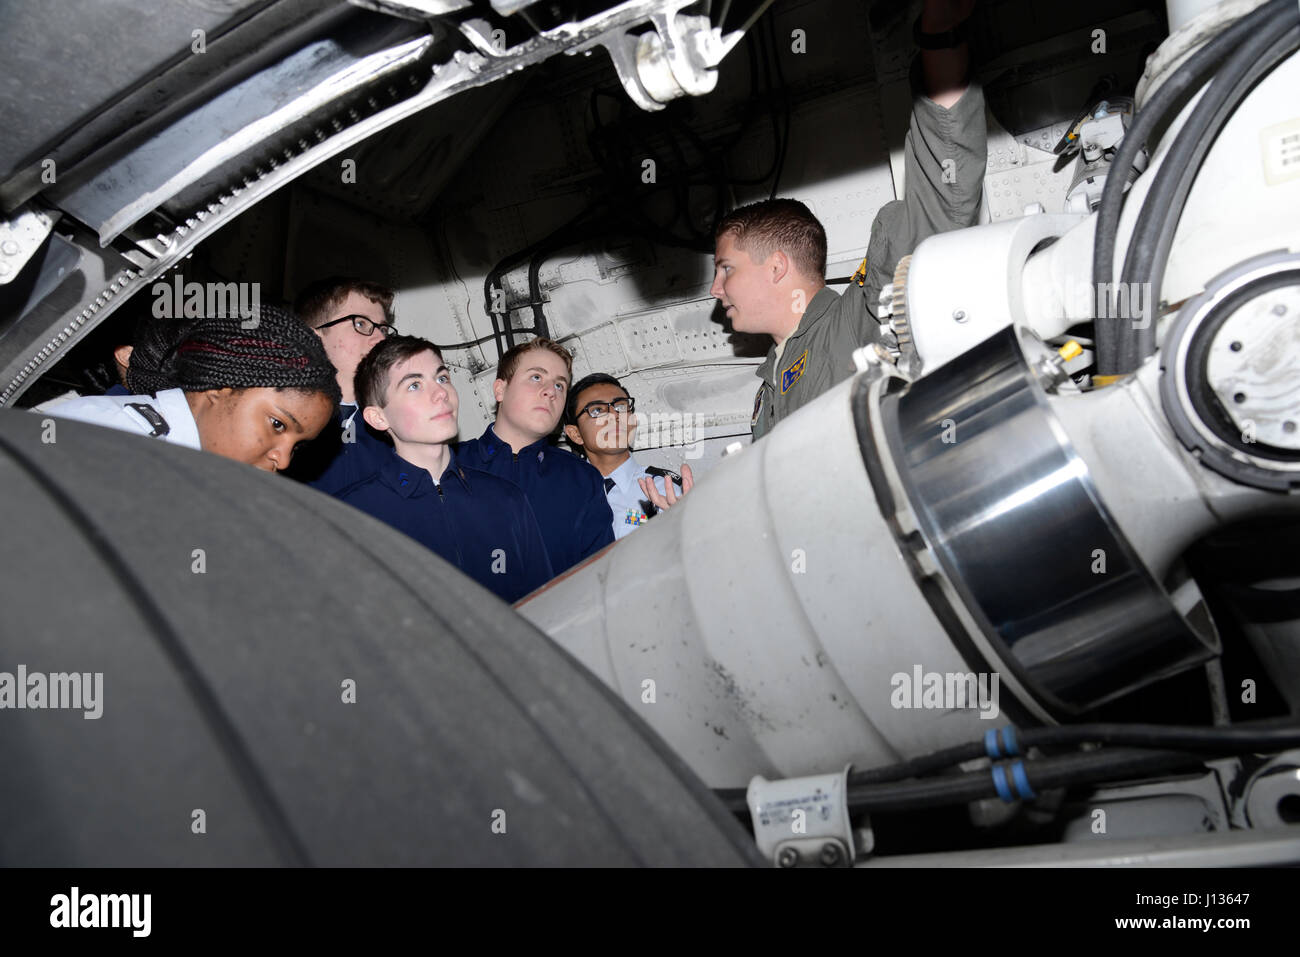 Senior Airman Levi Grant, a loadmaster assigned to the 105th Airlift Wing, shows cadets from the Newburgh Free Academy Junior Reserve Officer Training Corps program the inside of a C-17 Globemaster III wheel well during a tour at Stewart Air National Guard Base April 3, 2017. More than 40 cadets attended the special tour of the base. (U.S. Air Force photo by Staff Sgt. Julio A. Olivencia Jr.) Stock Photo